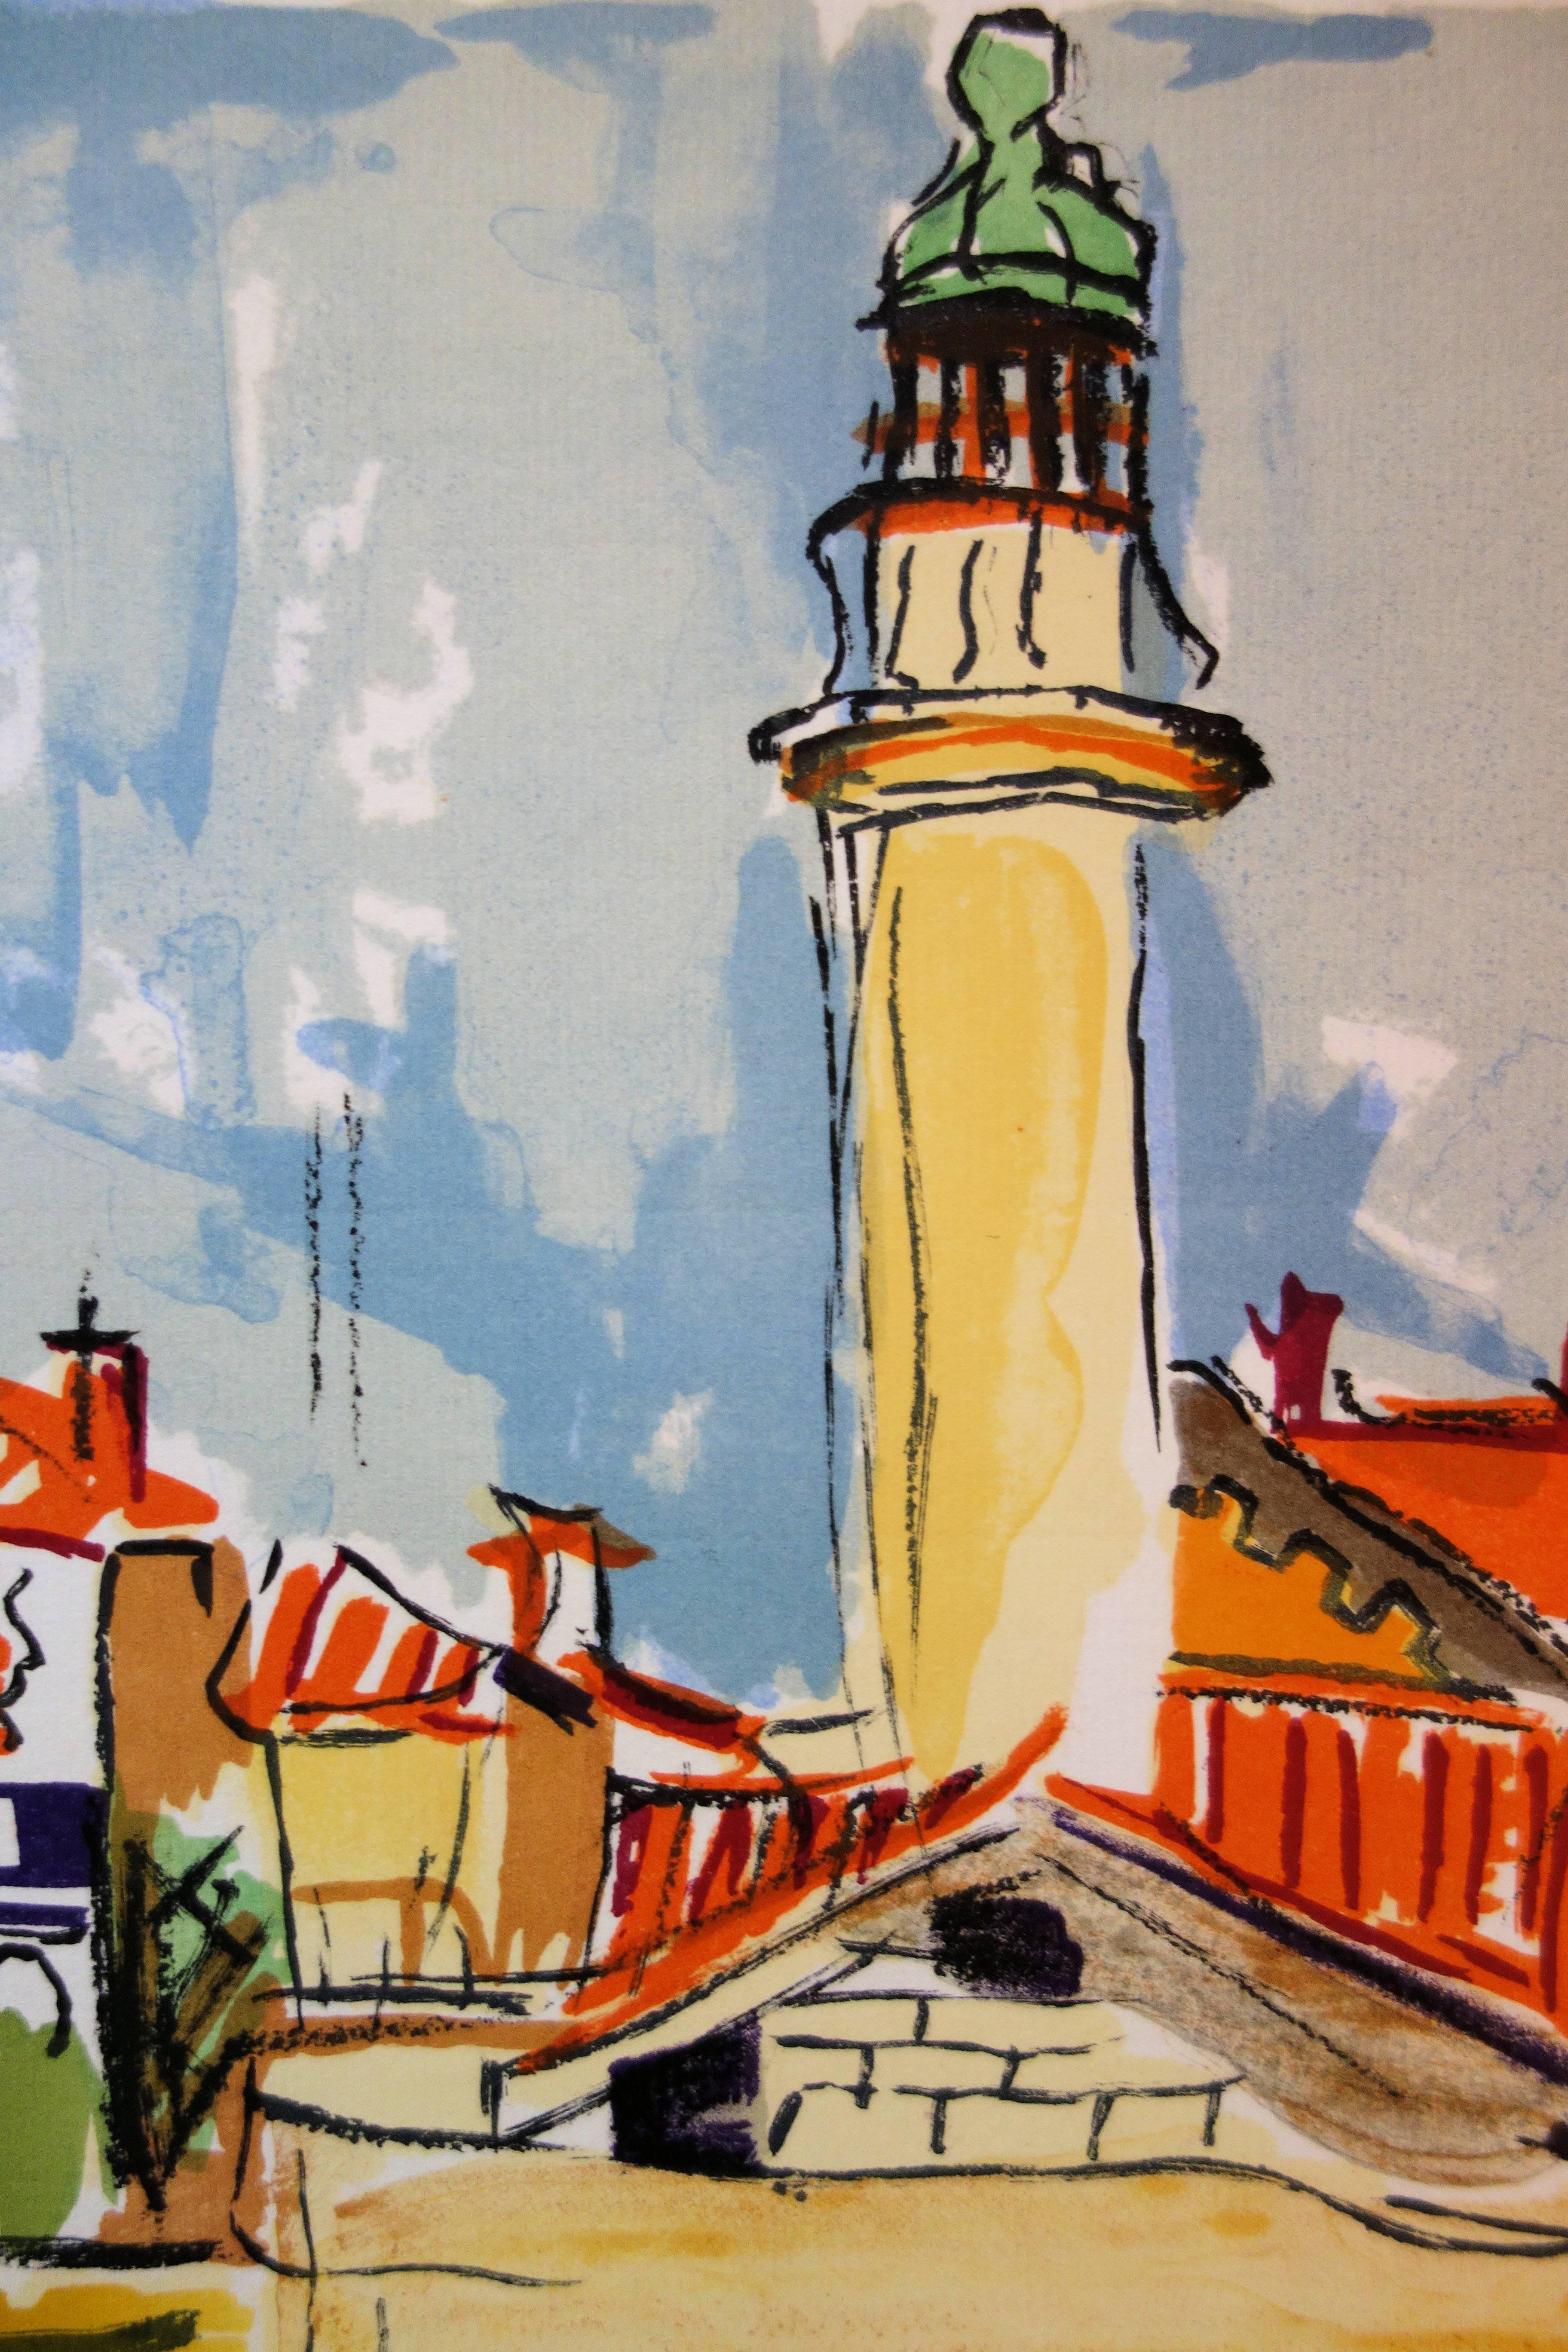 Francois DESNOYER
The Lighthouse, 1965

Original lithograph
Handsigned in pencil
On wove paper
45 x 33 cm (c. 18 x 13